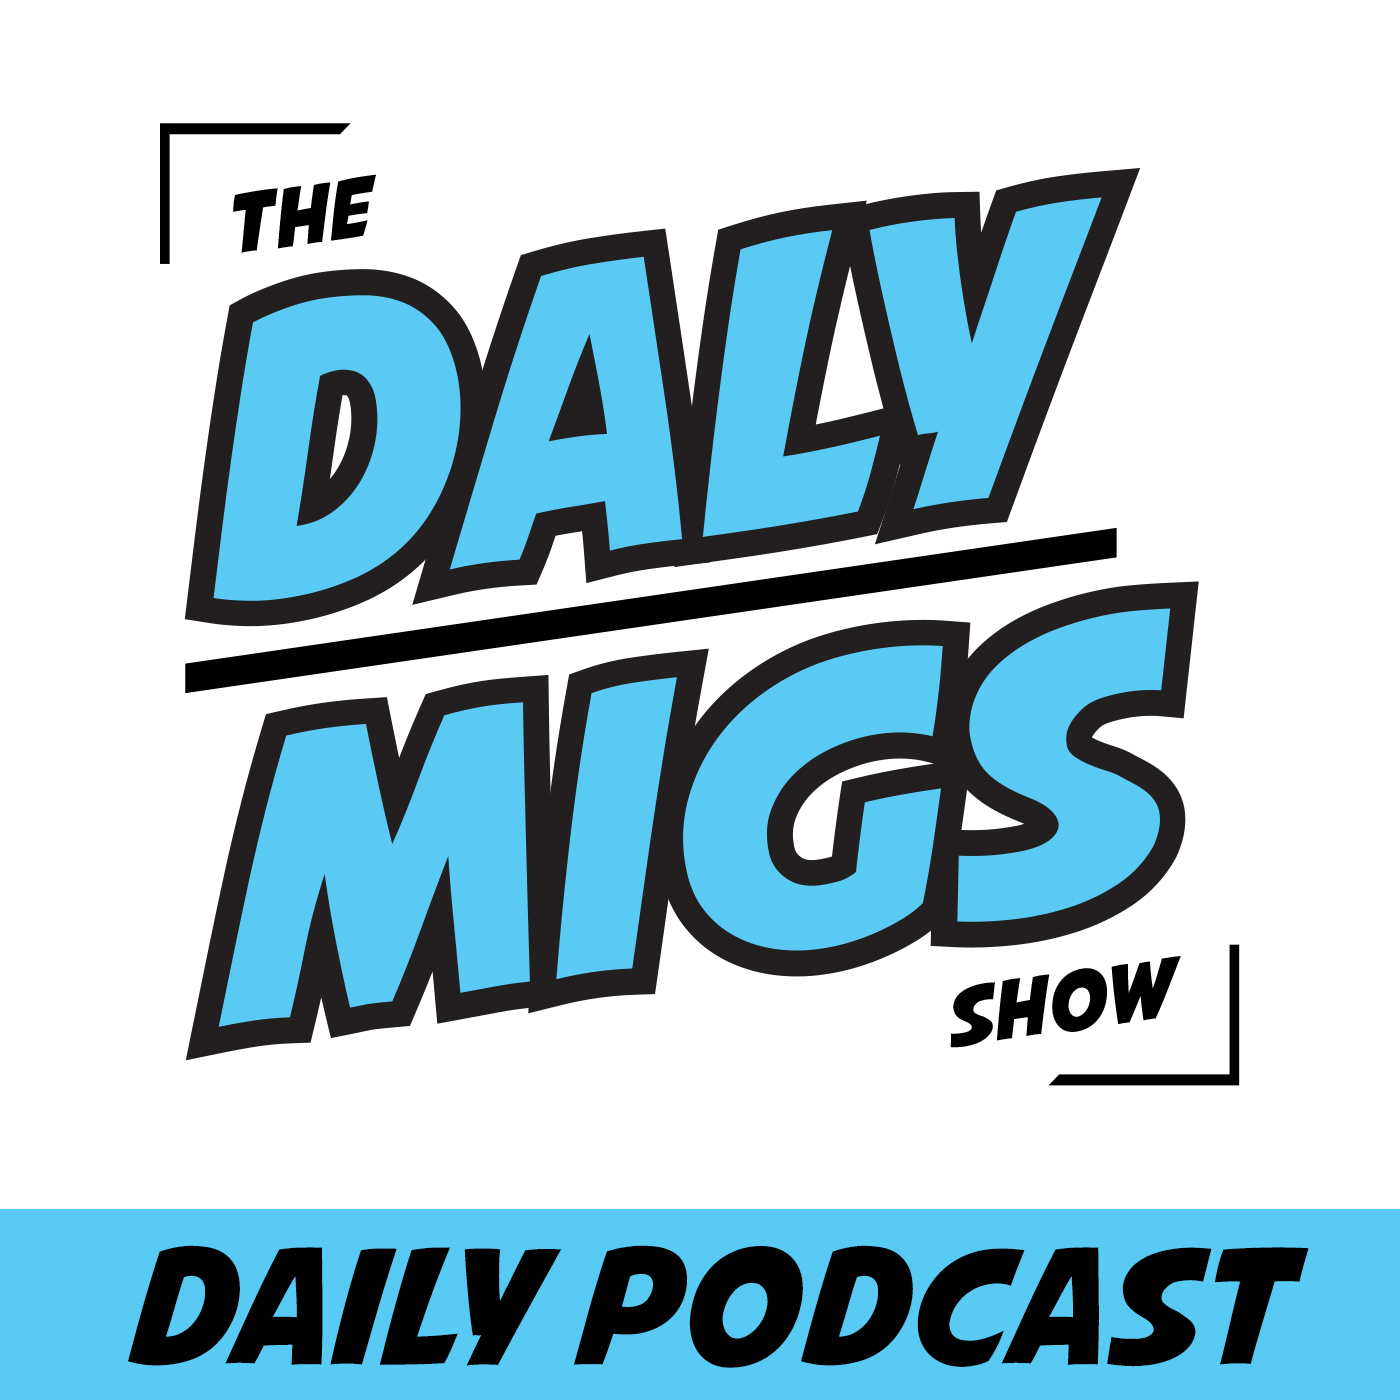 BJ & MIGS Podcast 10-26-20-7A: Mitch Levy joins us!